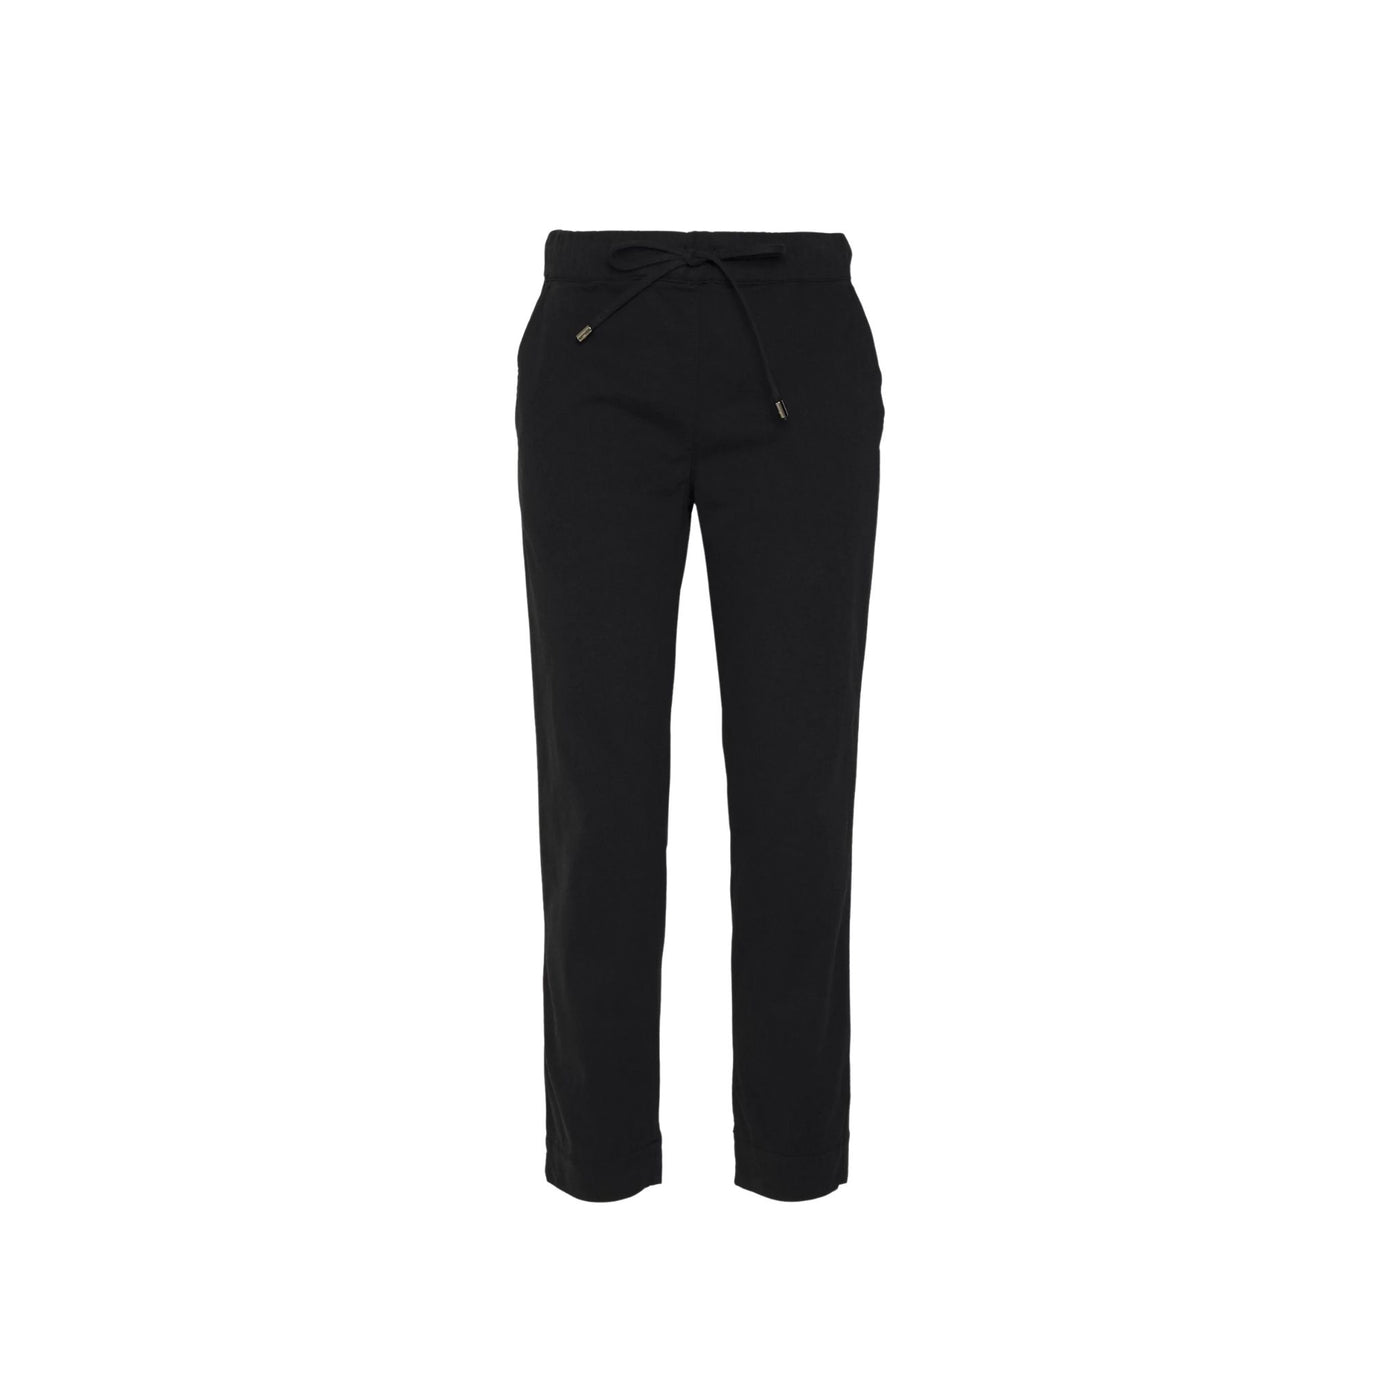 Women's trousers with drawstring